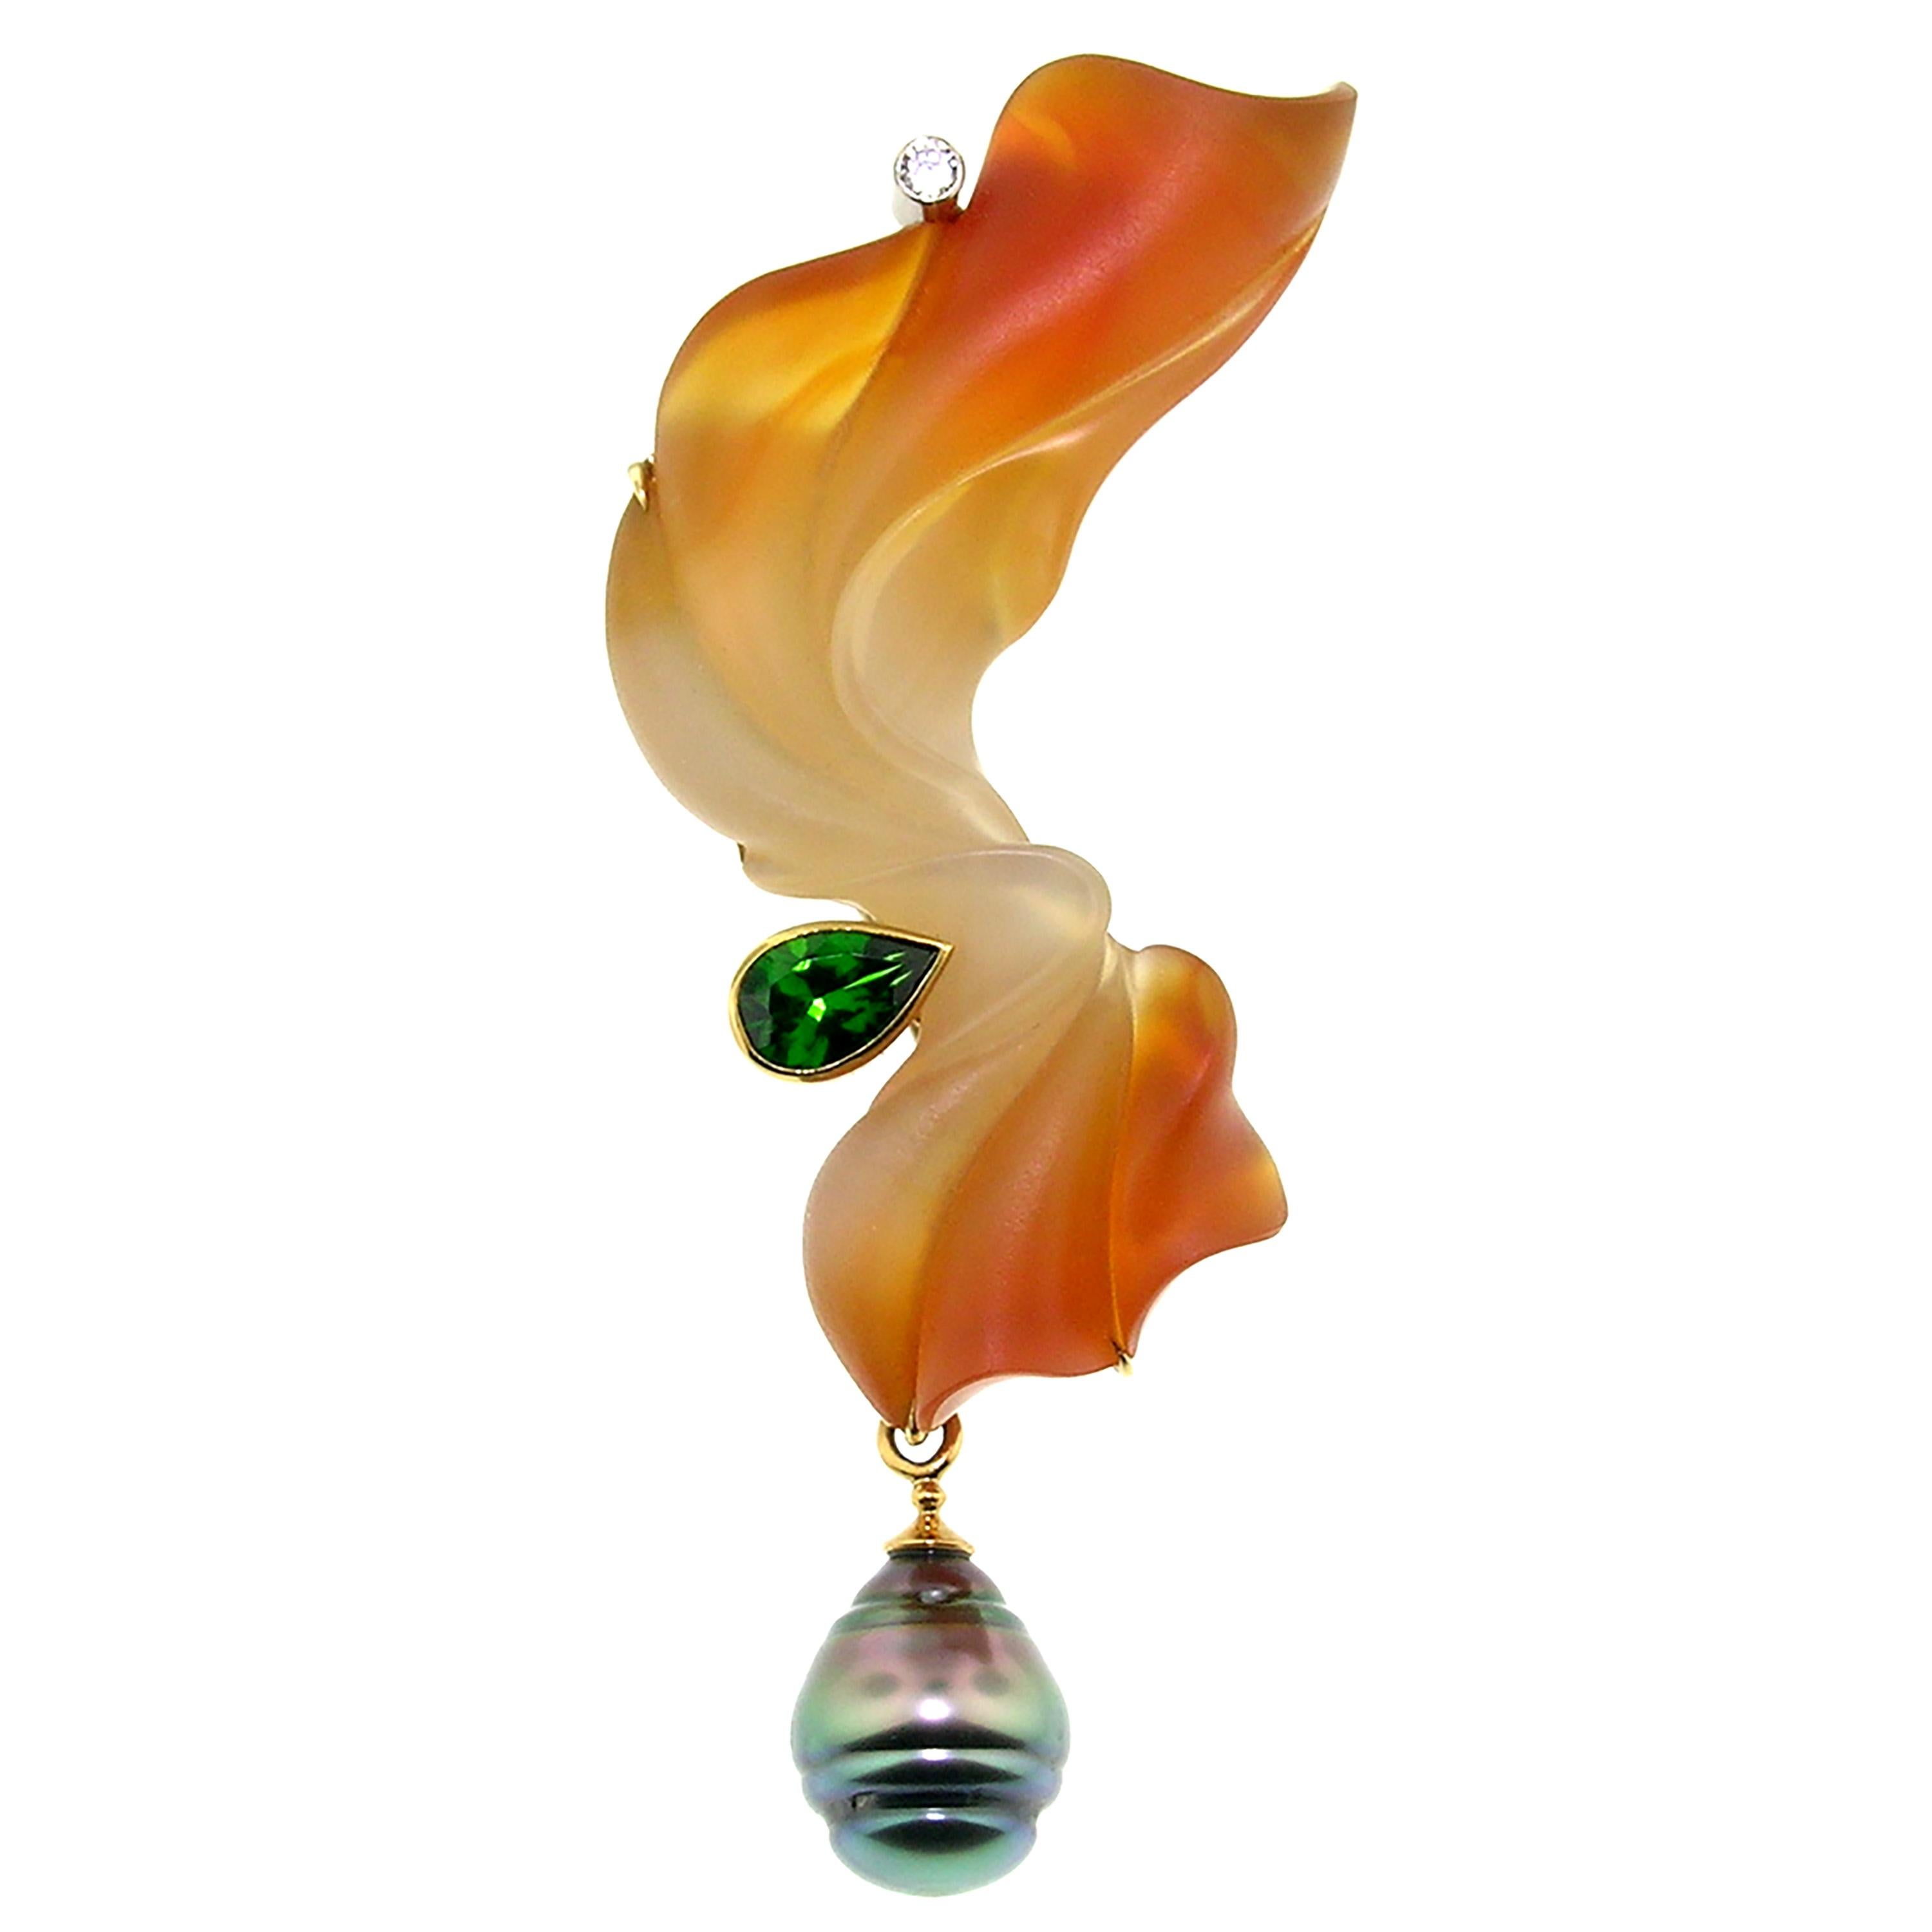 This is a high impact piece of jewelry which will leave an impression whenever and however you wear it. The variegated color of this exquisite carnelian was perfectly incorporated into this carving by master lapidary artist Steve Walters. A very